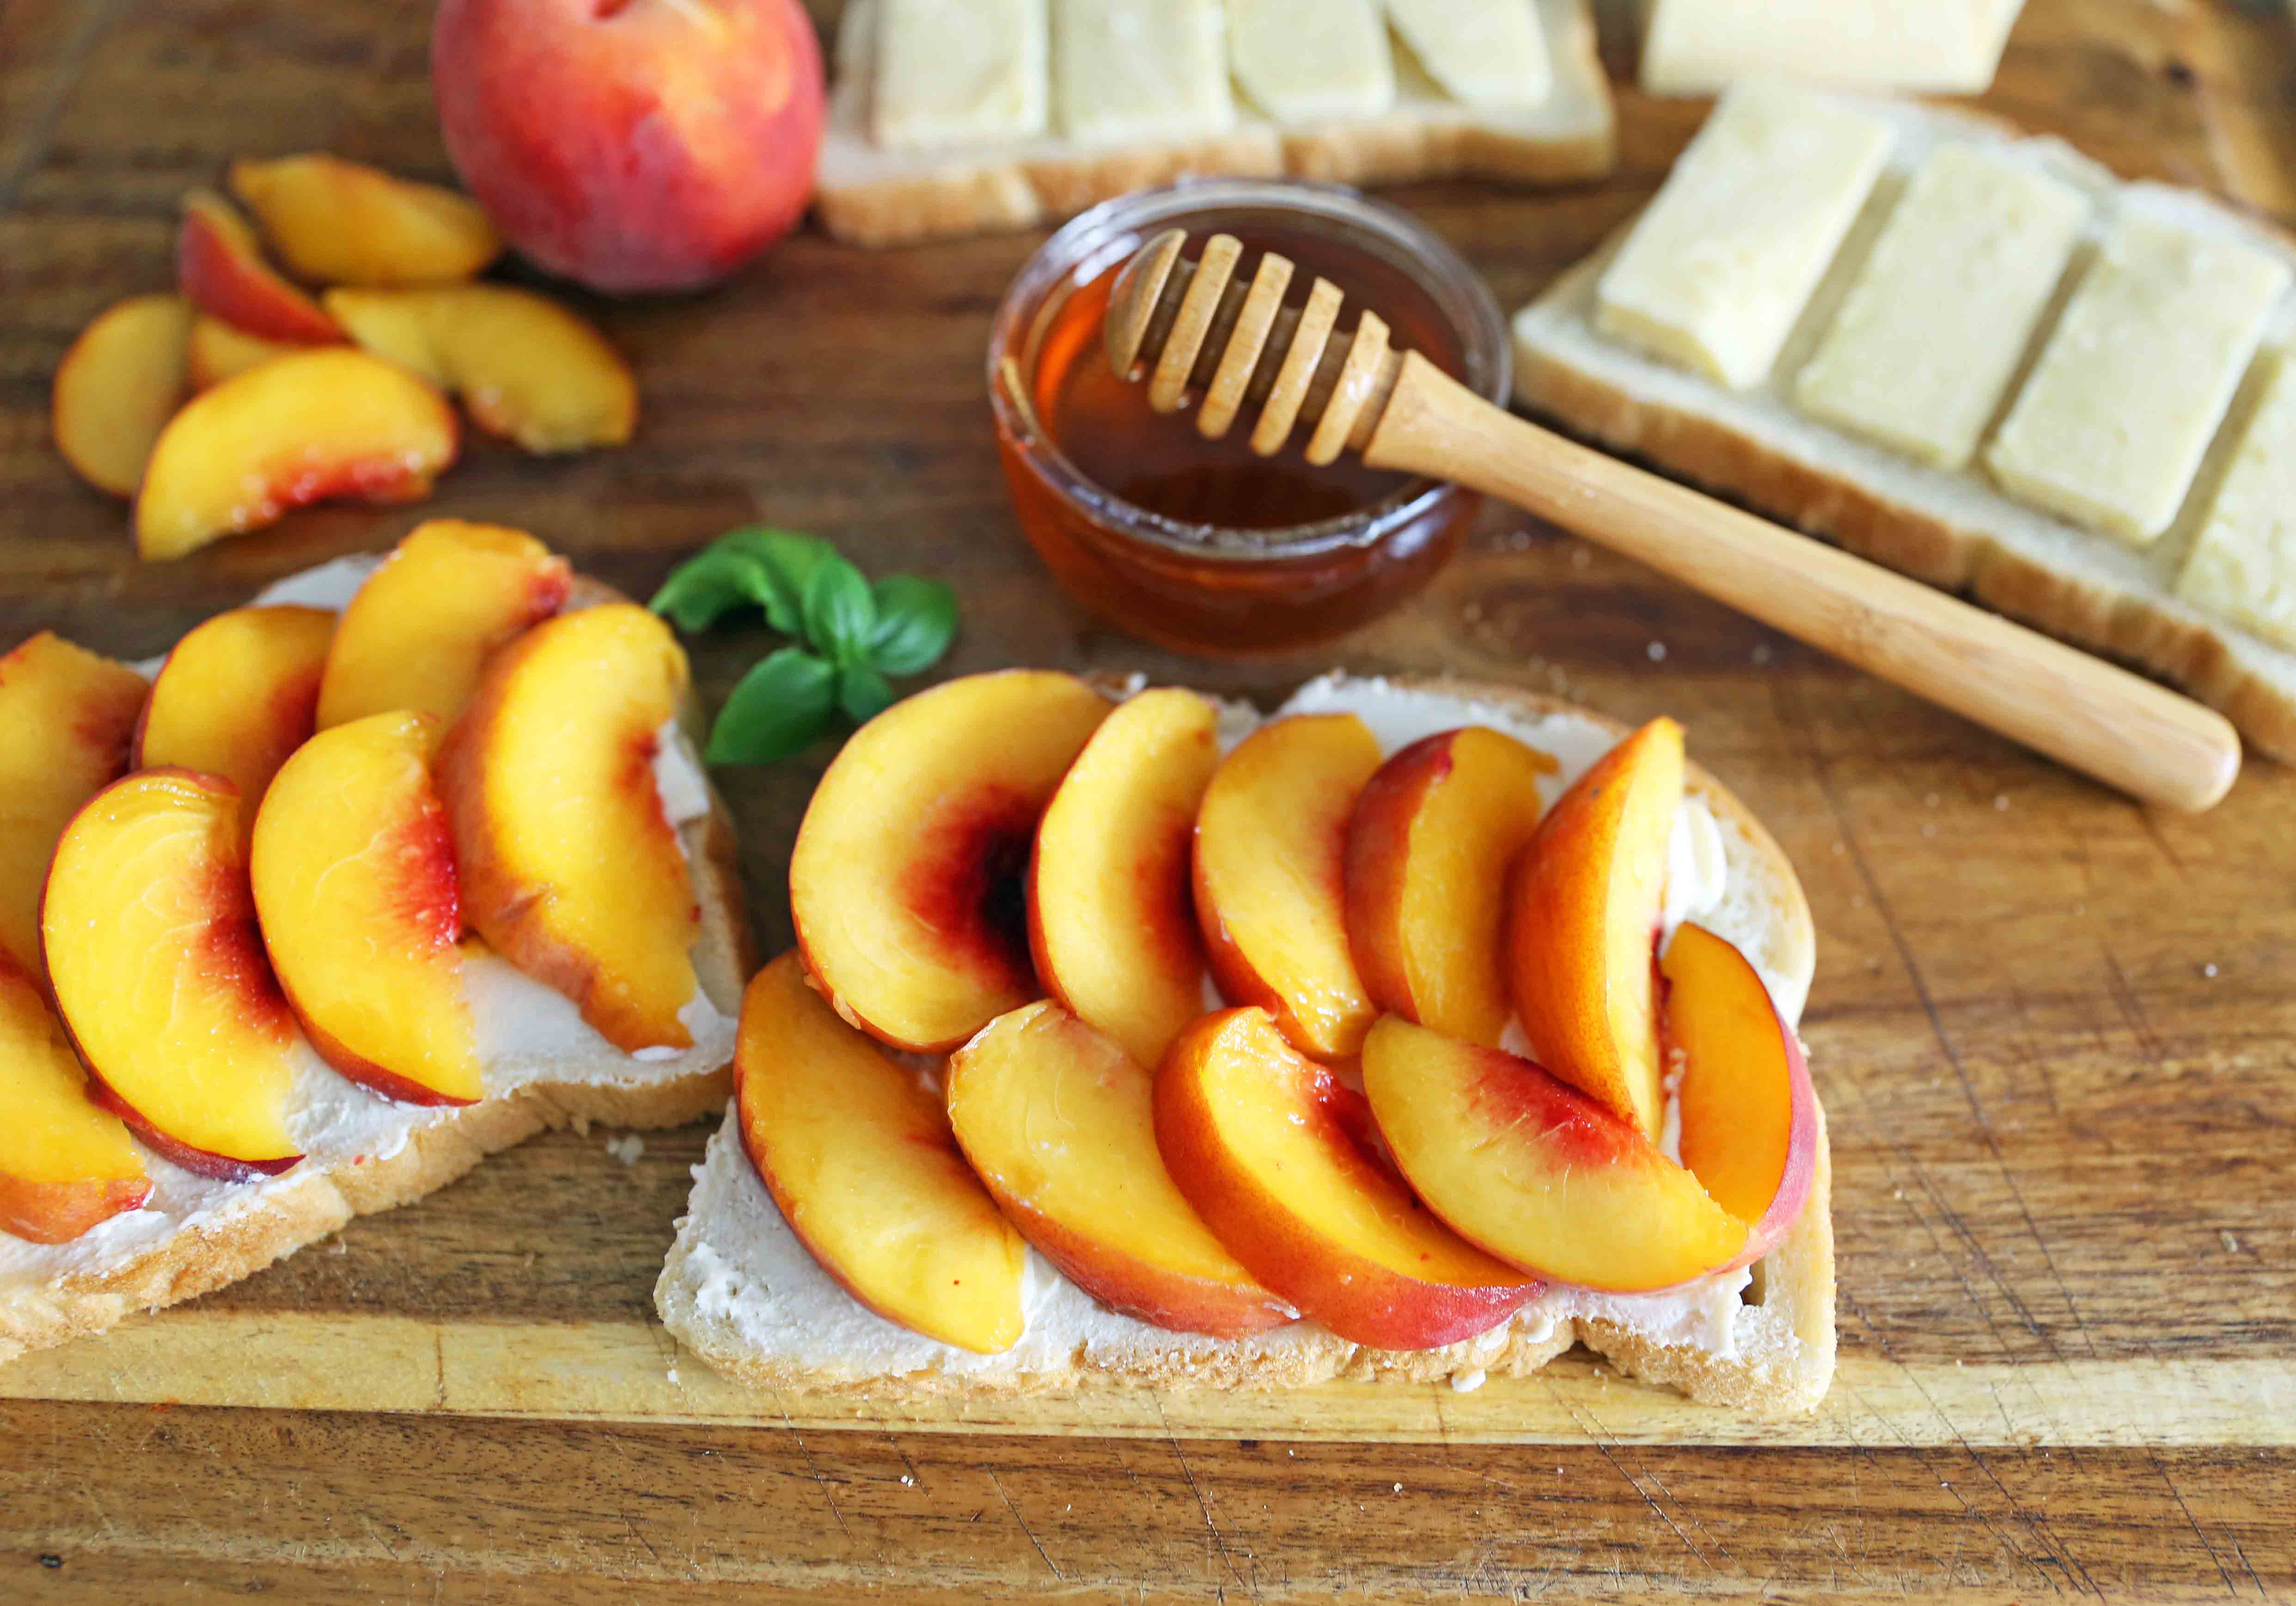 Honey Peach White Cheddar Grilled Cheese Sandwich. A summer grilled cheese sandwich with sweet juicy peaches, white cheddar cheese, a drizzle of honey on buttery toasted bread. www.modernhoney.com #peaches #grilledcheese #peachgrilledcheese 